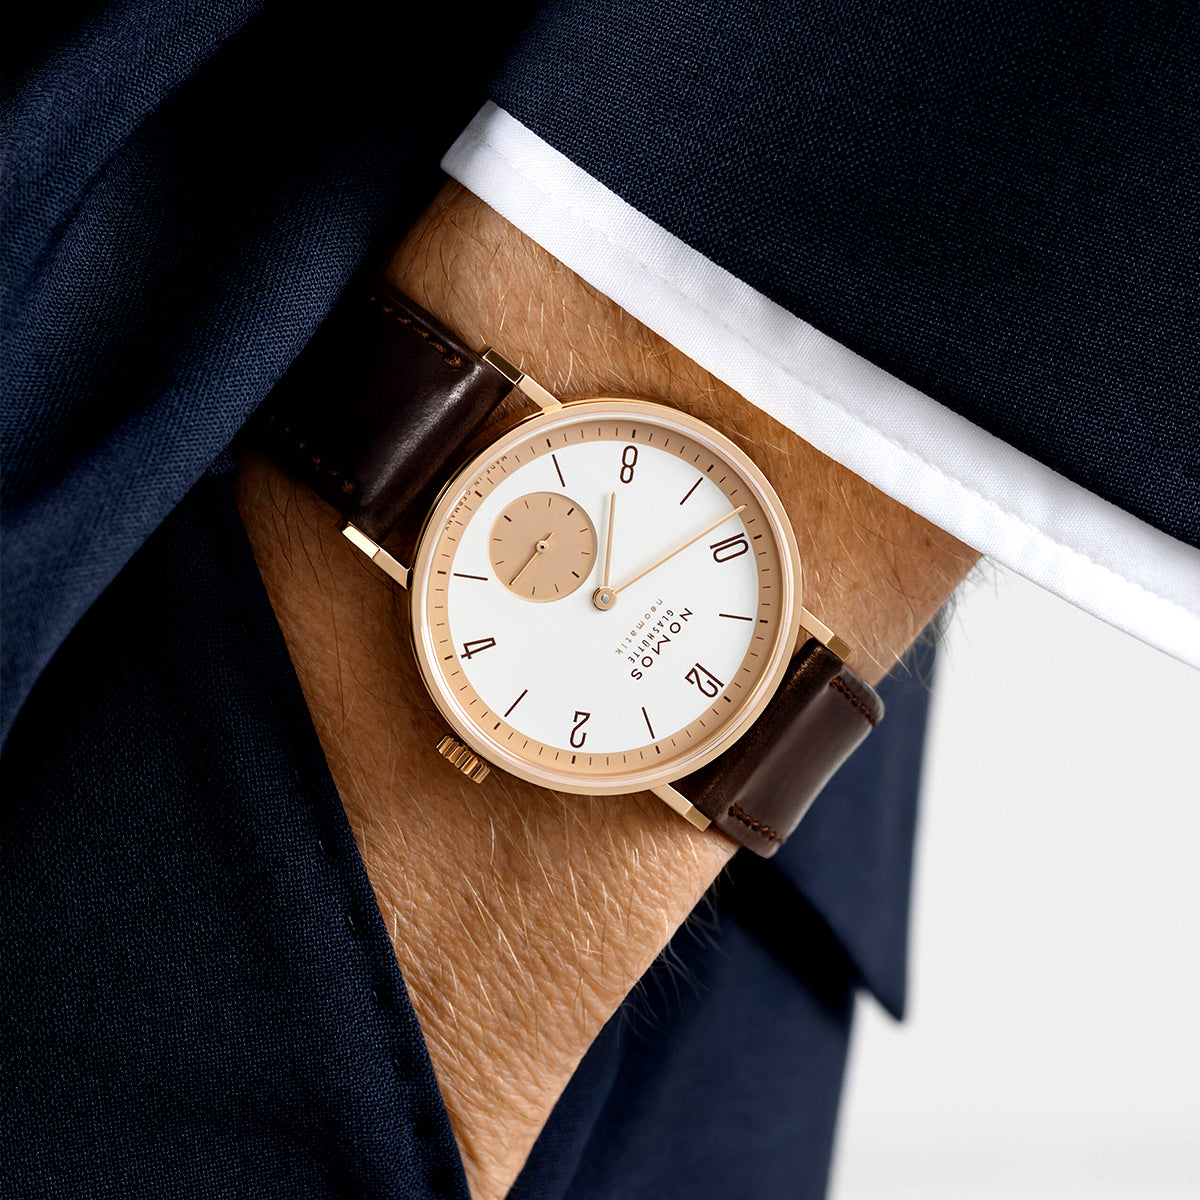 Tangente '175 Years Watchmaking Glashutte' Limited Edition Watch